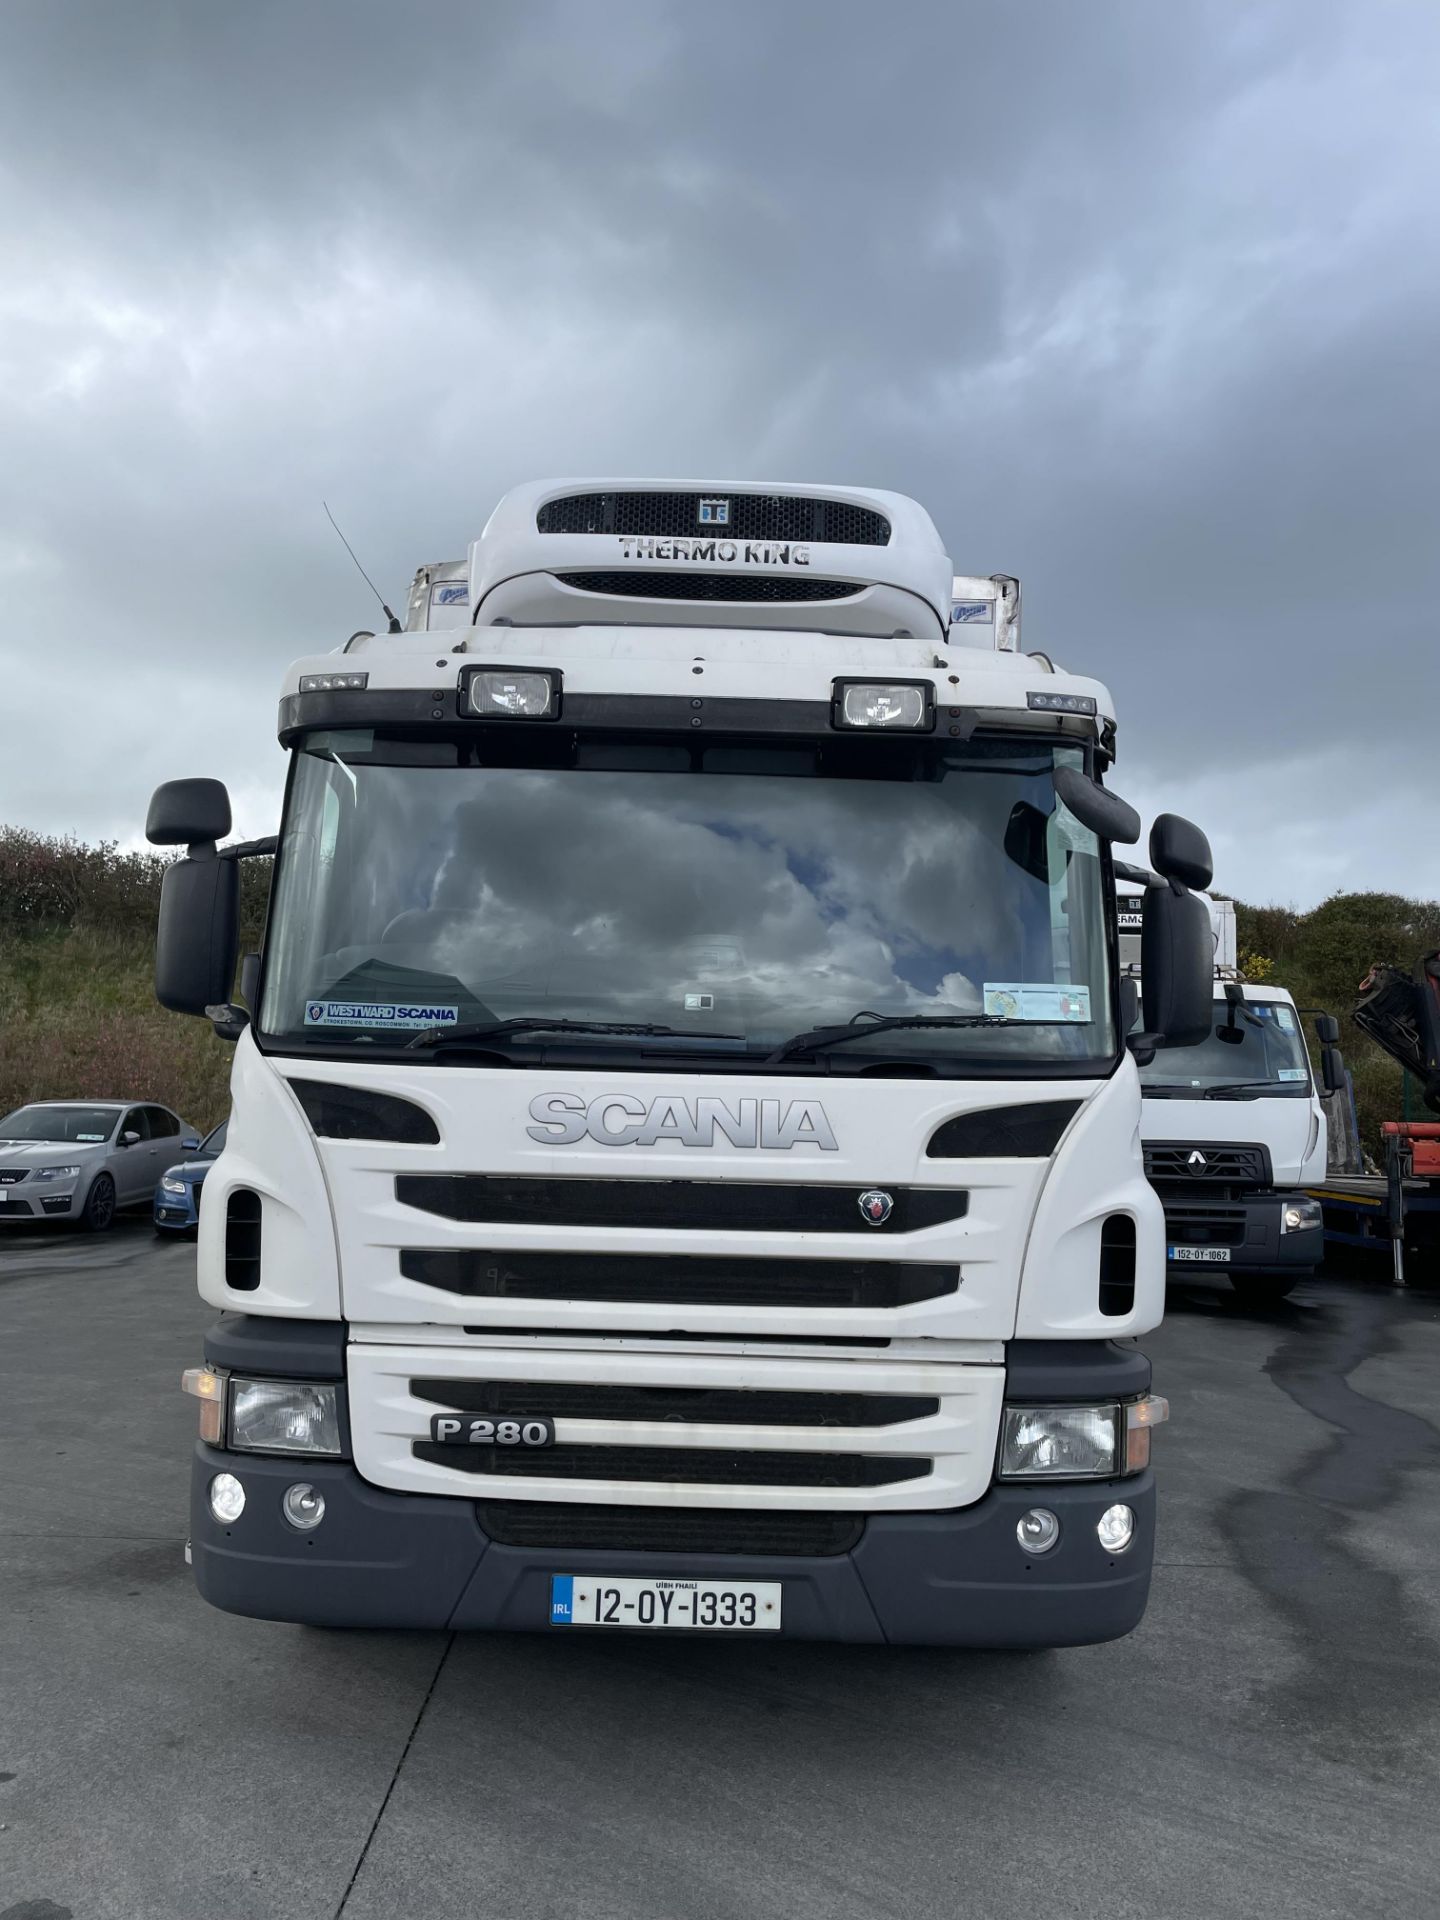 SCANIA REFRIGERATED TRUCK. 26 FT - REG 12 OY 1333